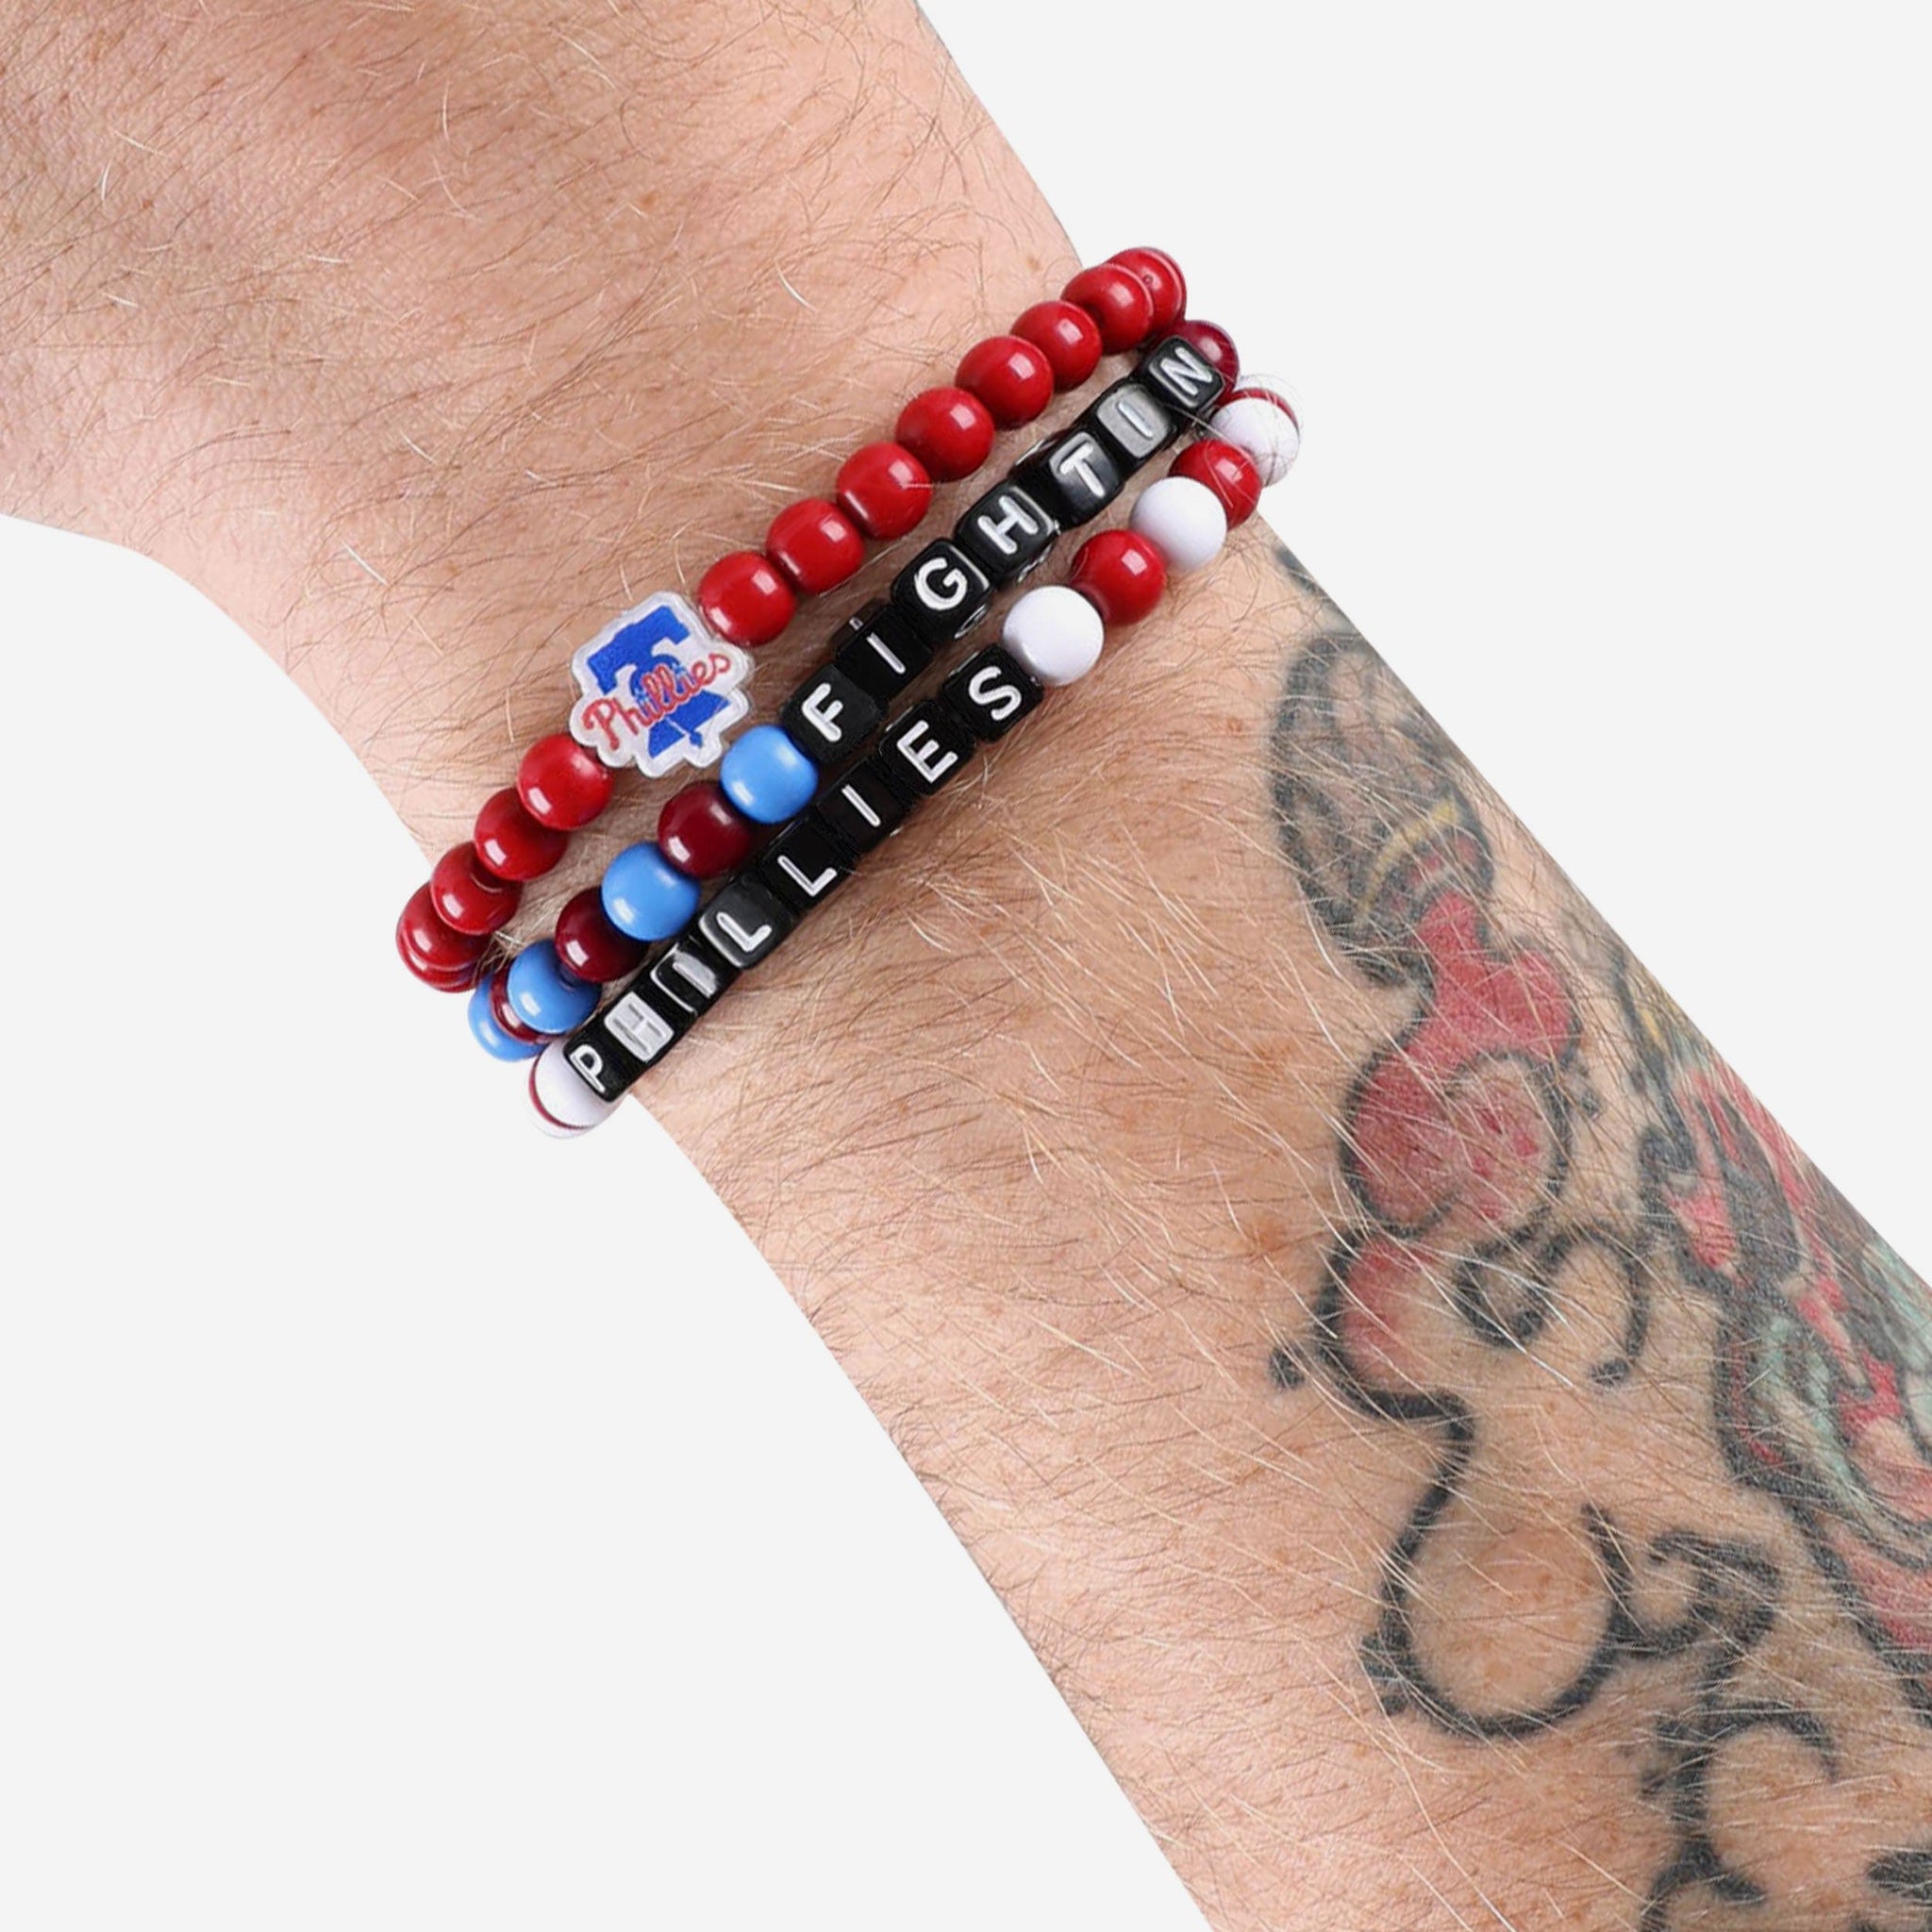 Meet the New Jersey brothers who made a bracelet for Phillies star